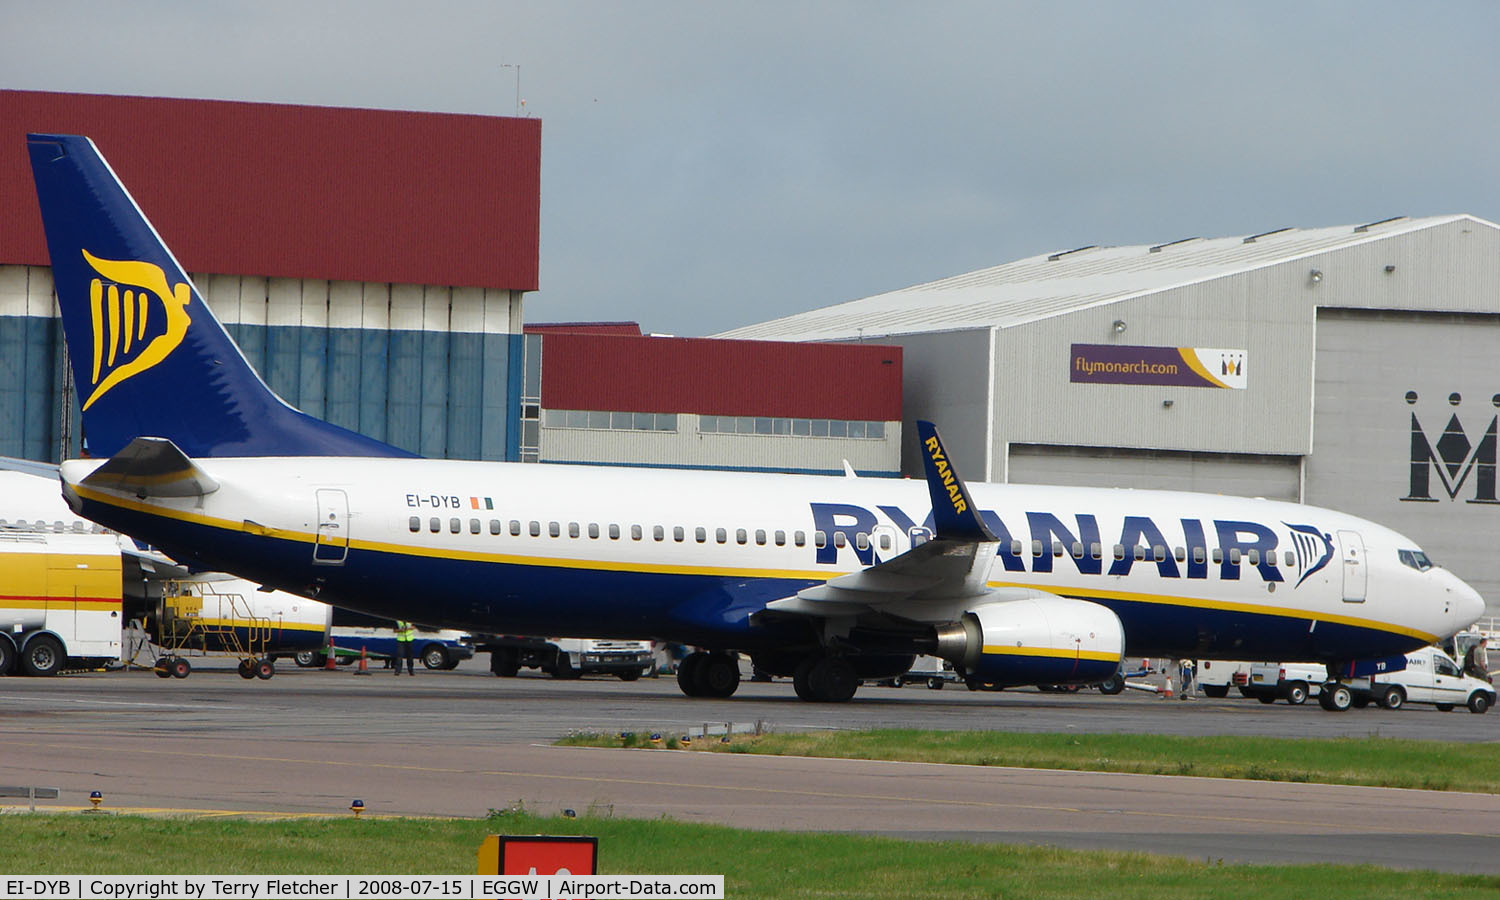 EI-DYB, 2008 Boeing 737-8AS C/N 33633, One of the latest batch of Ryanair B737 deliveries pays a visit to Luton